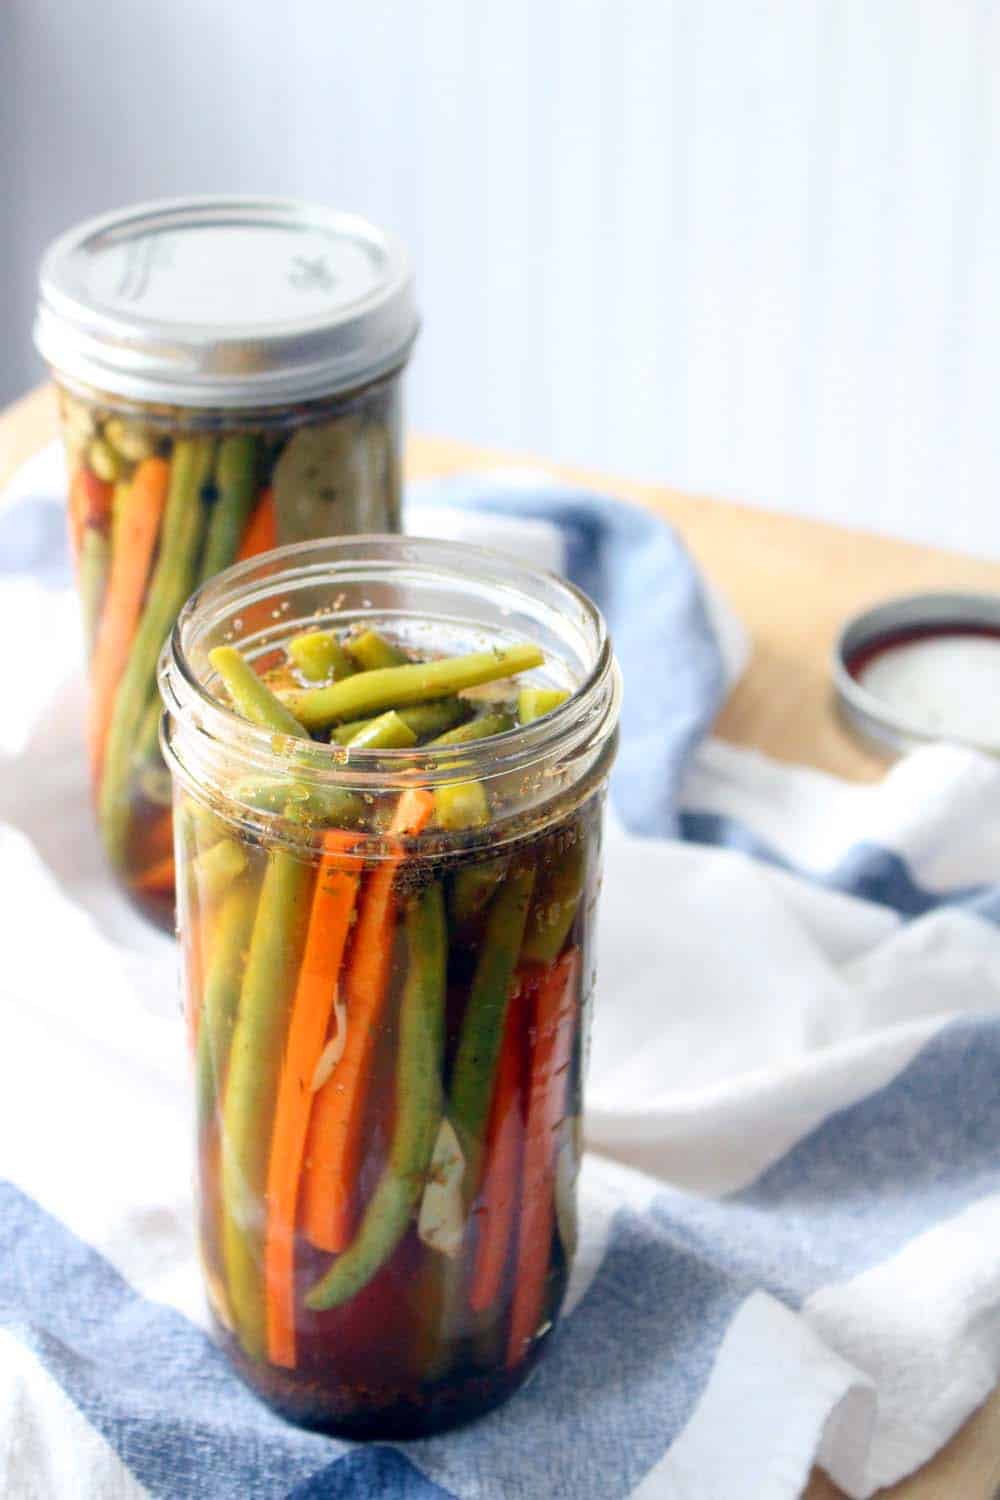 Two tall glass jars holding pickled green beans and carrots. One is in the foreground with an open top, and one is in the background with the lid on.